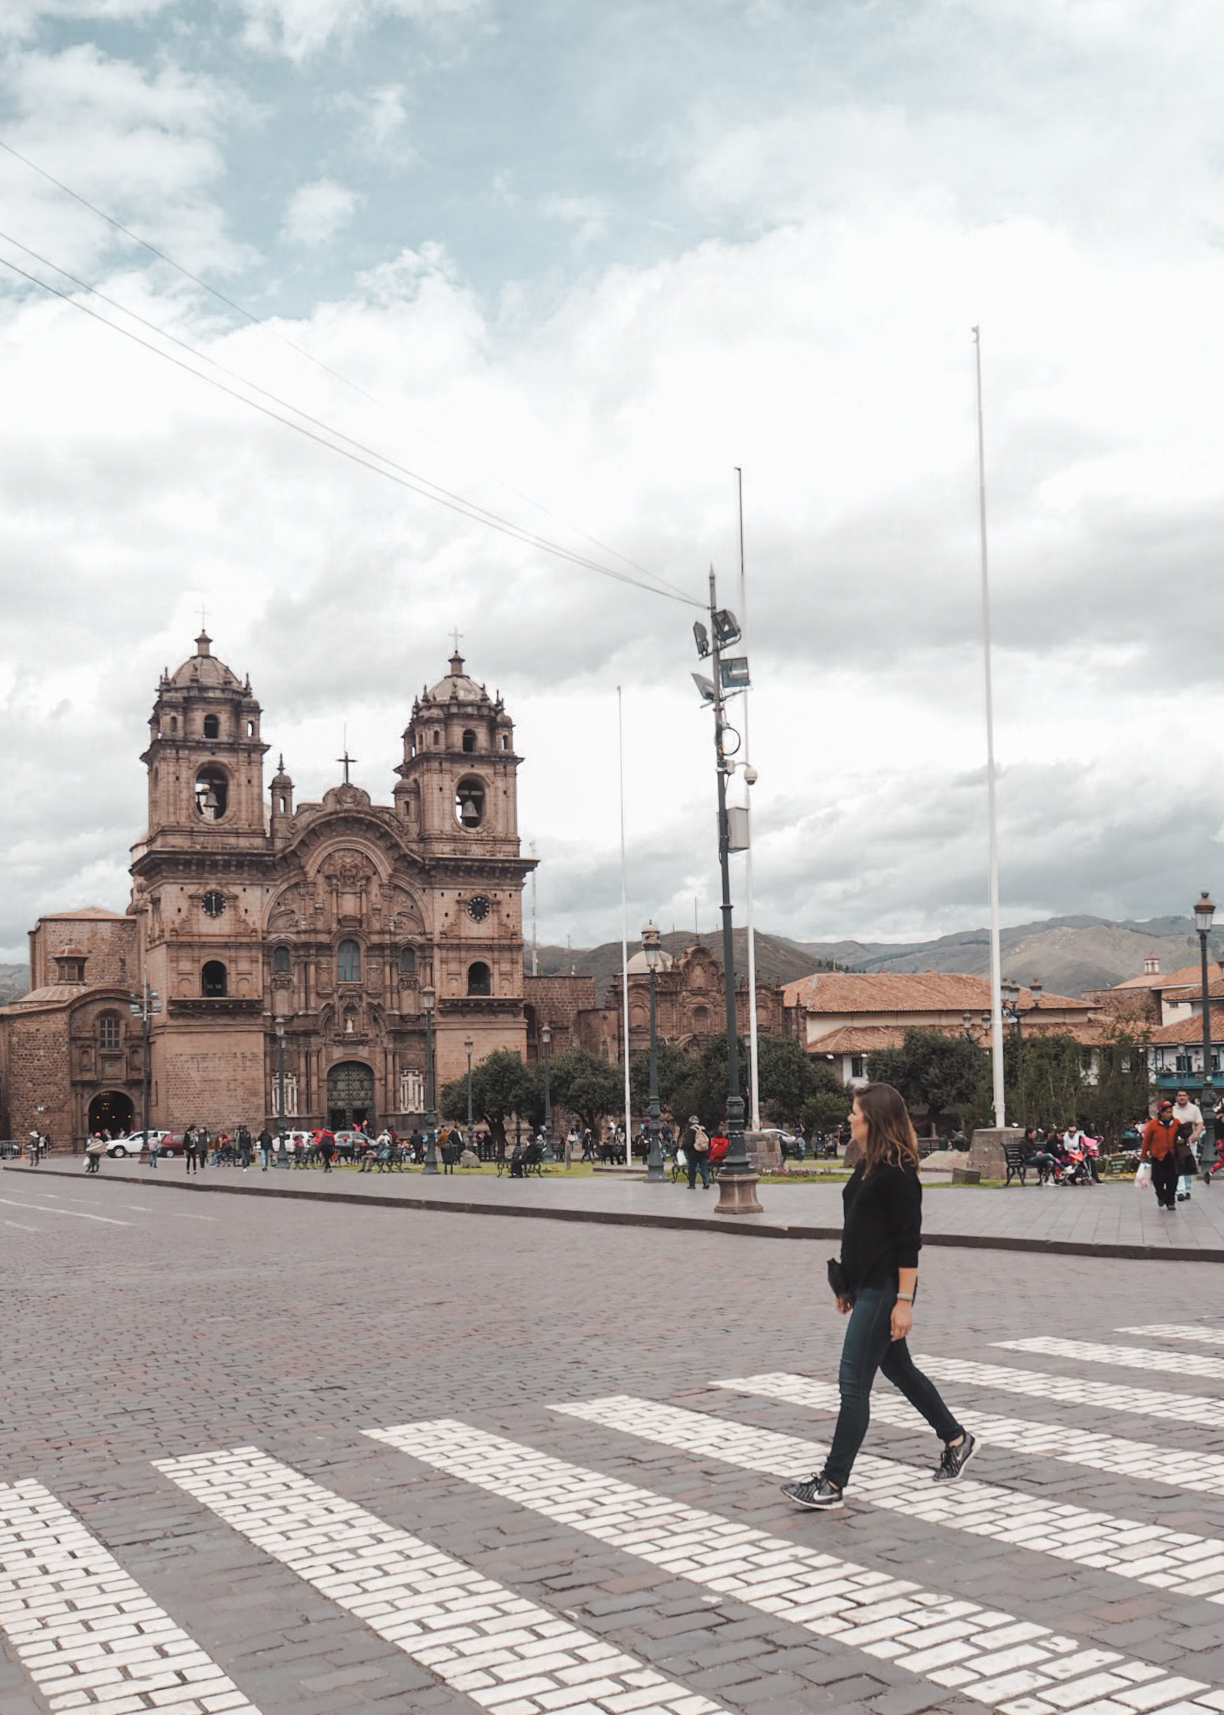 Cusco 5-Day Itinerary: A Peruvian's Guide | www.aestheticstraveler.com Luxury Travel and Design Editorial